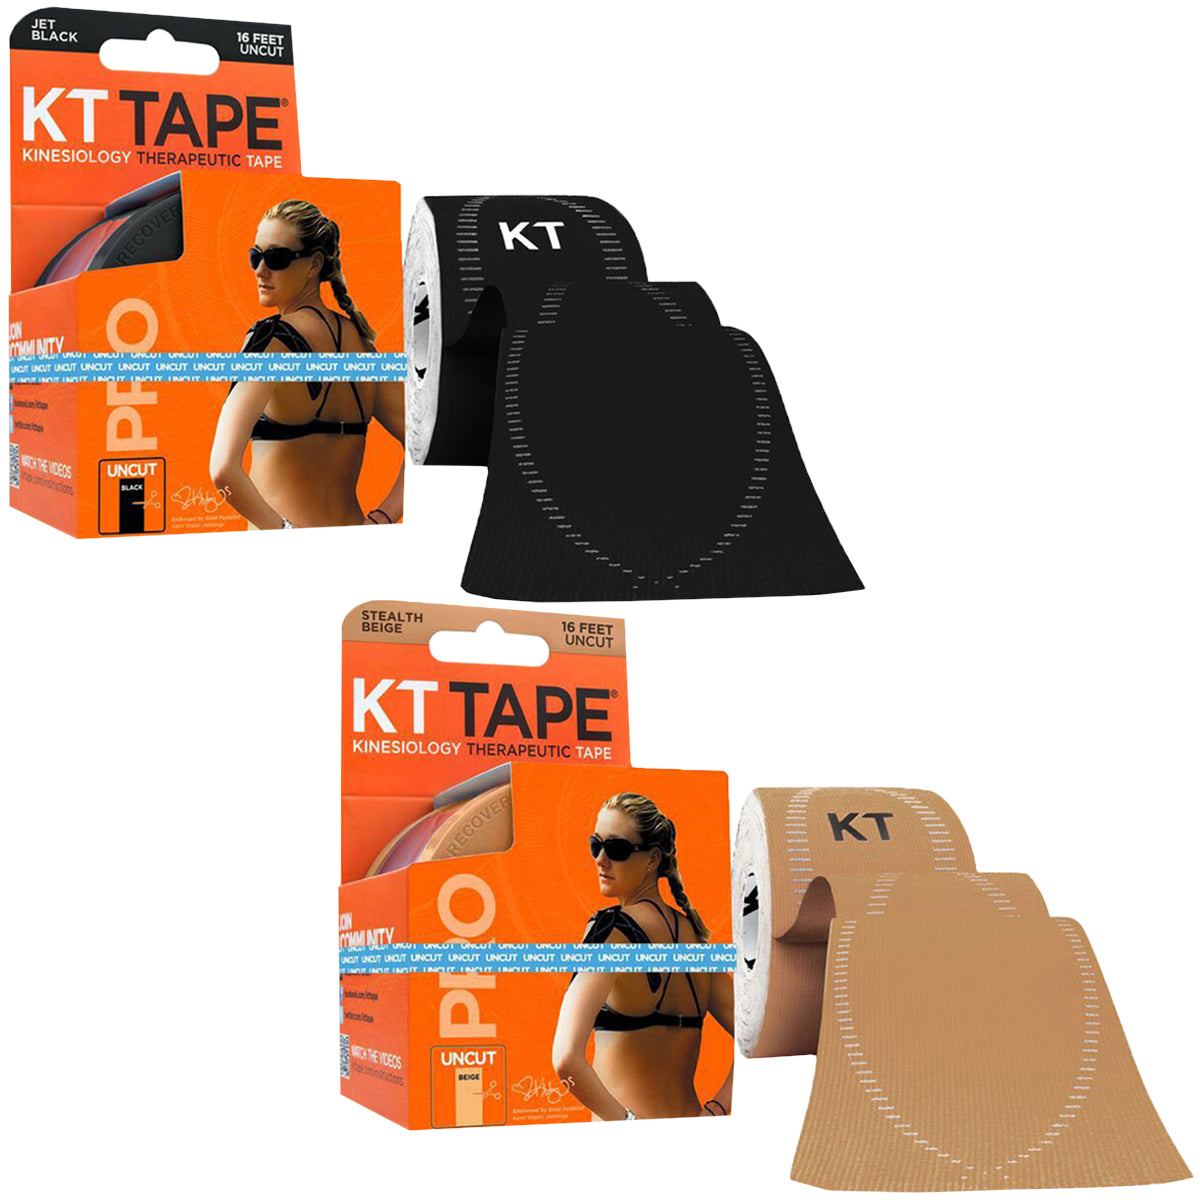 KT Tape Pro 16 ft Uncut Kinesiology Therapeutic Elastic Sports Tape Roll KT Tape